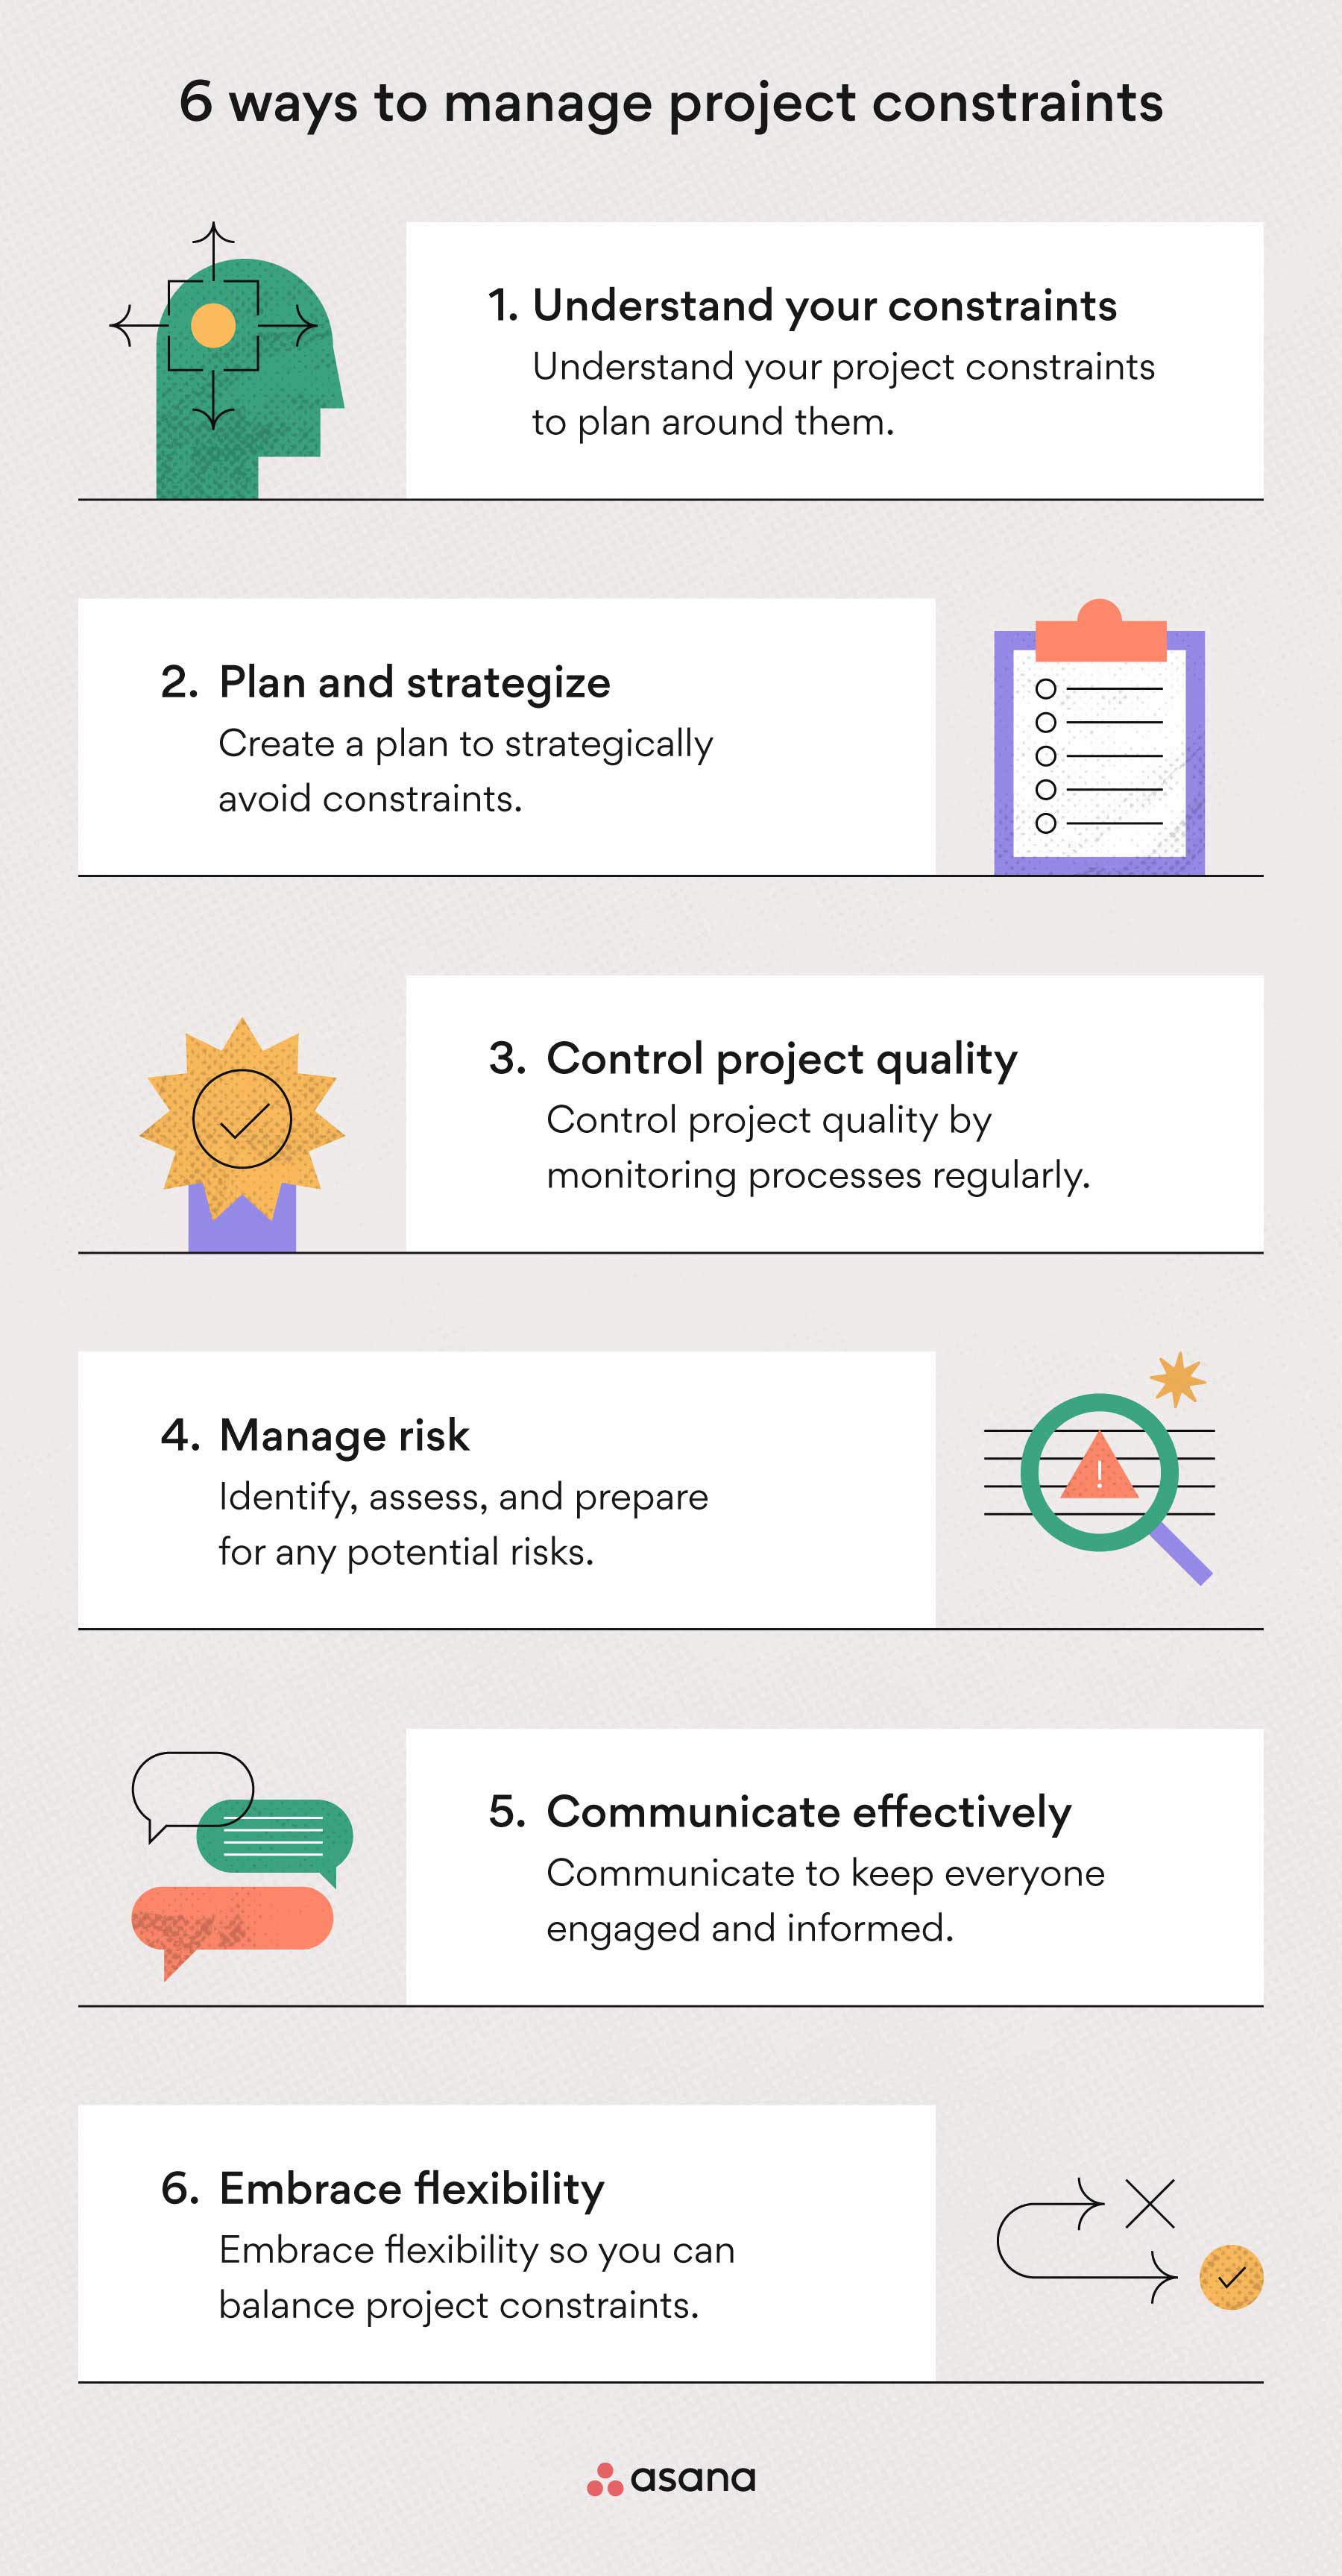 6 ways to manage project constraints